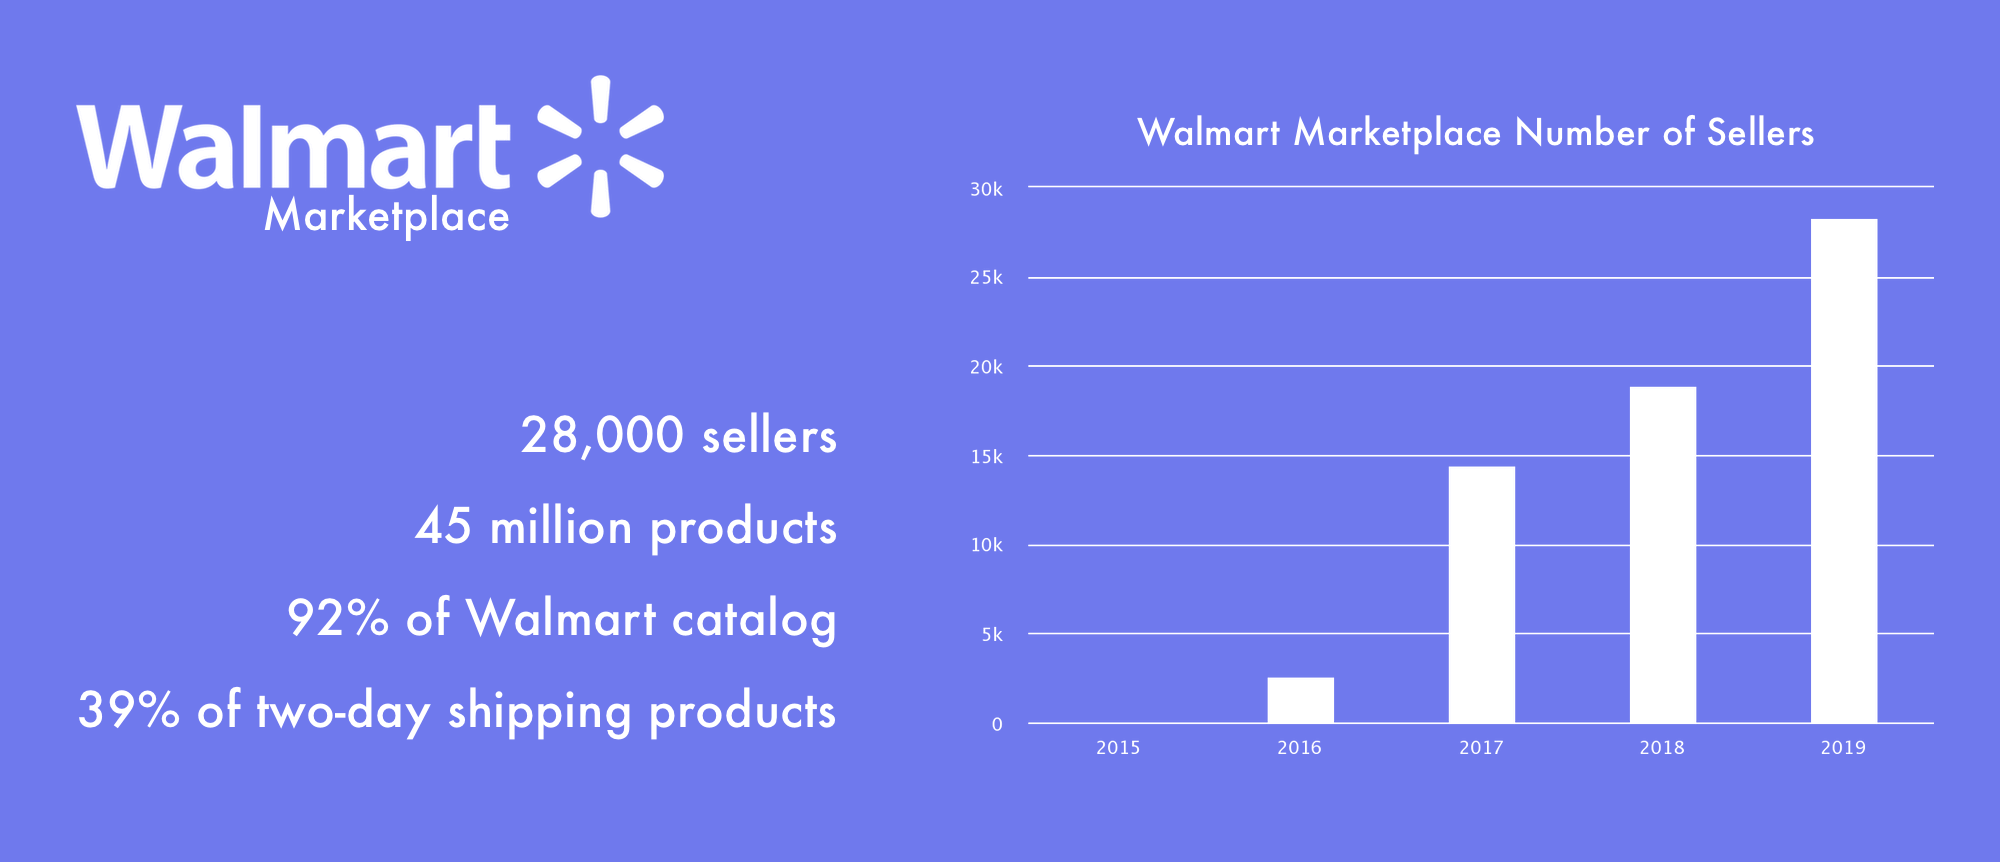 Walmart Marketplace Number of Sellers